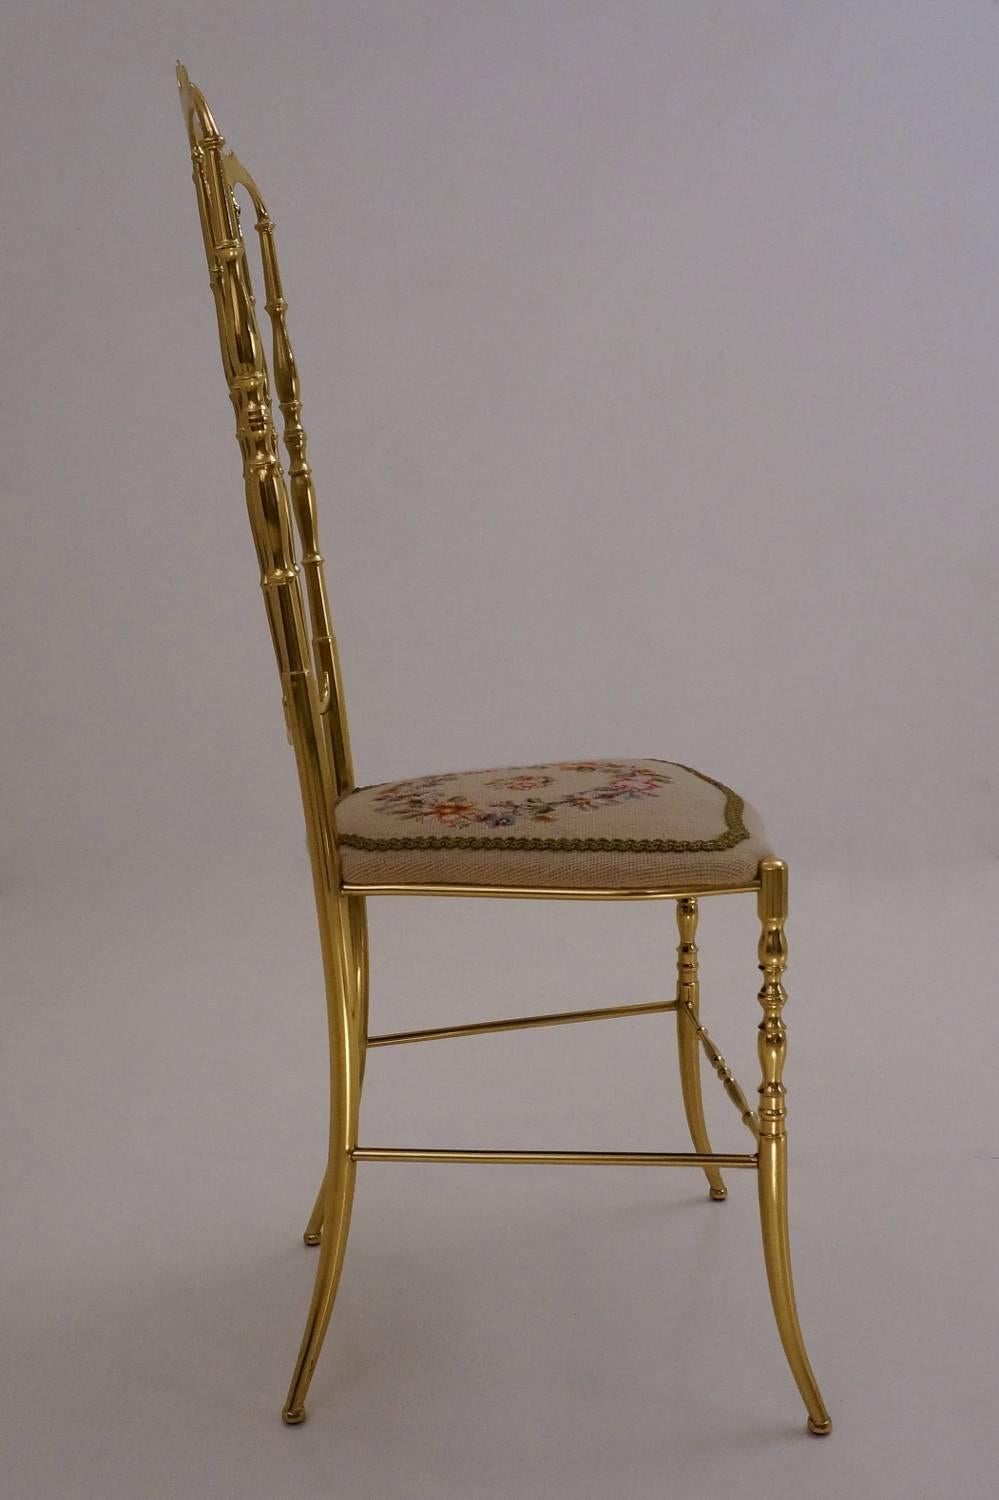 Chiavari Solid Brass Chair, Needle Point Seat and High Back, circa 1950s Italian 1